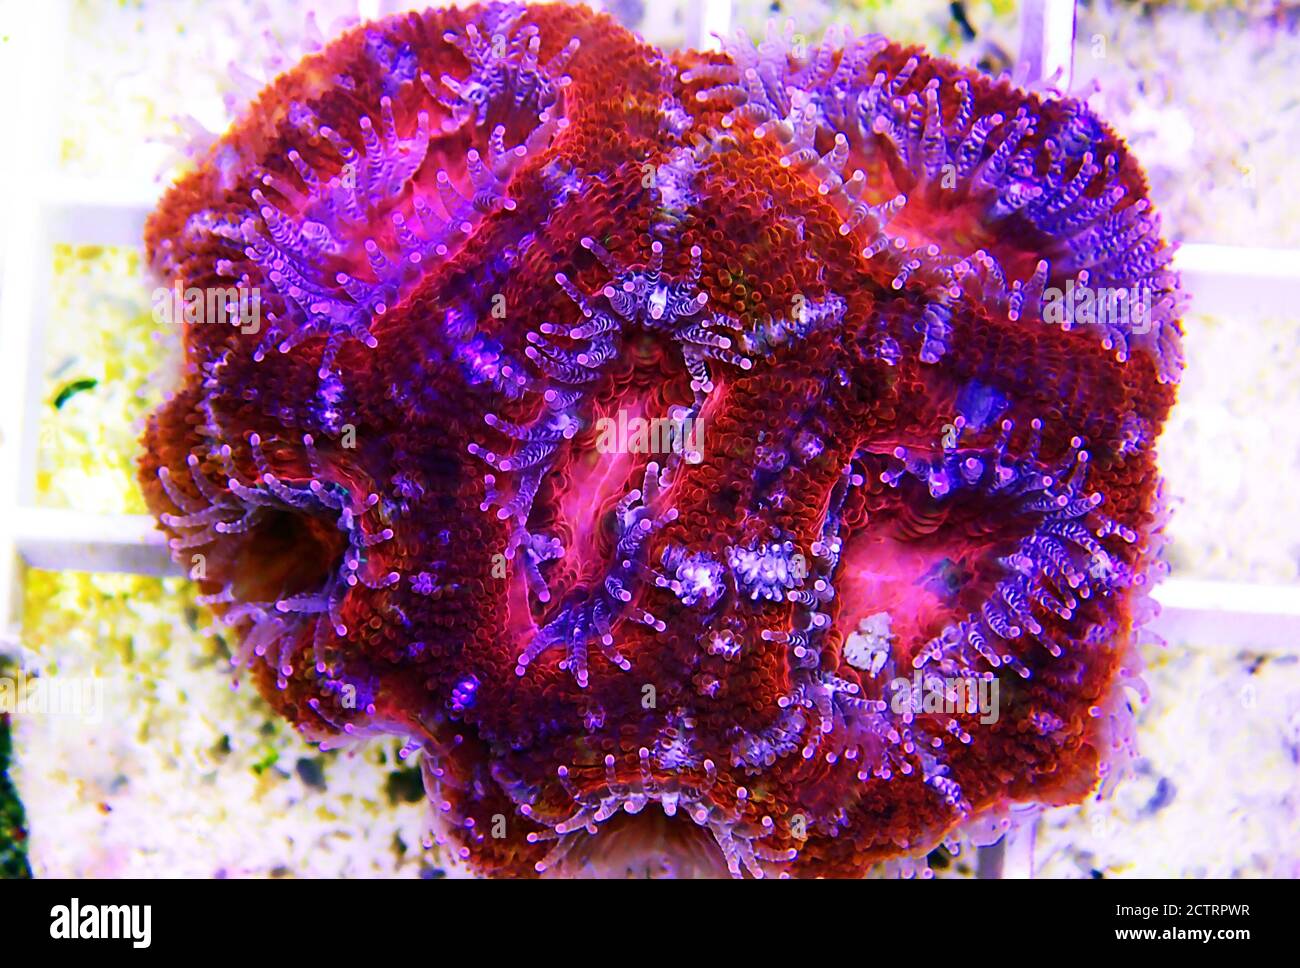 Acanthastrea Micromussa lordhowensis LPS coral in close up photography Stock Photo